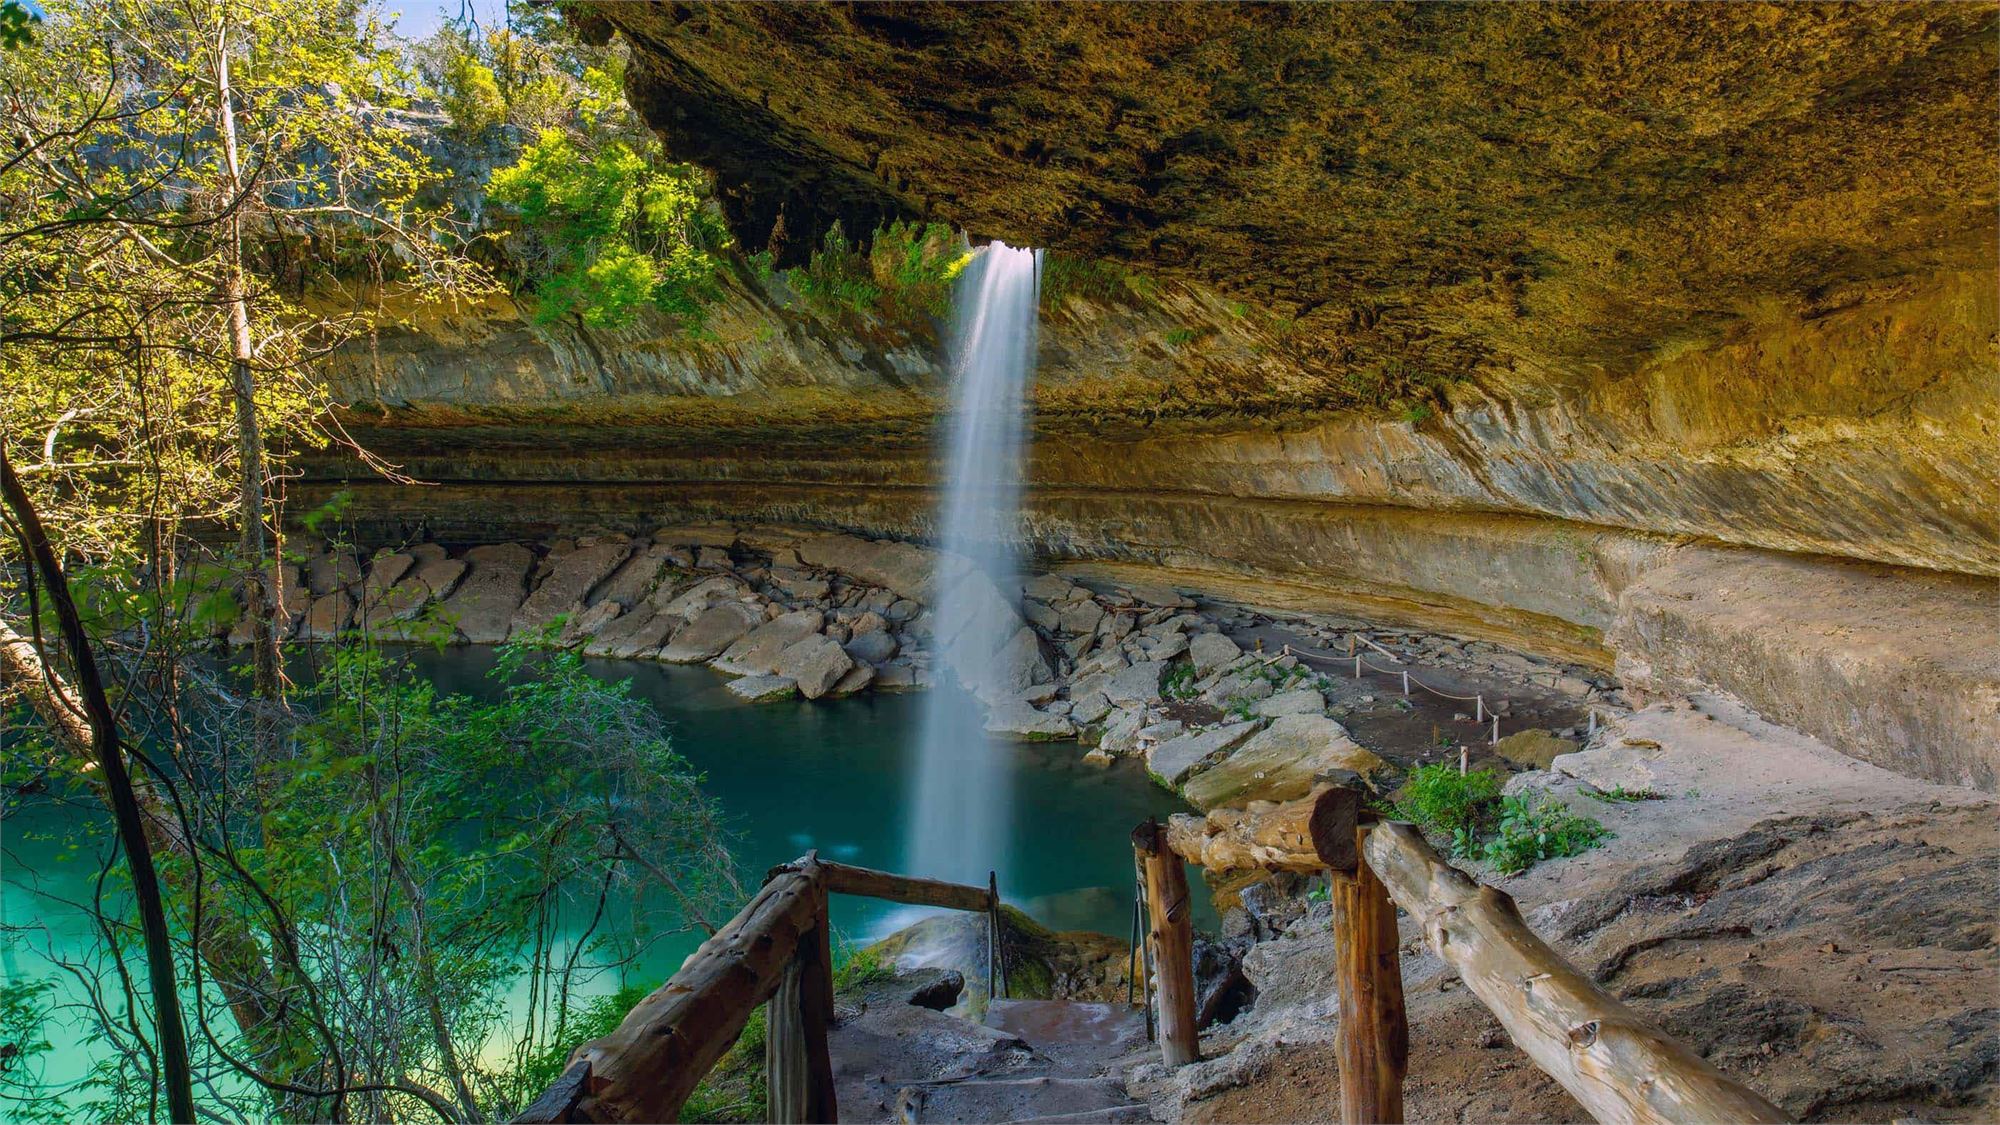 Enjoy the Top 10 Best Things To Do in Dripping Springs, TX